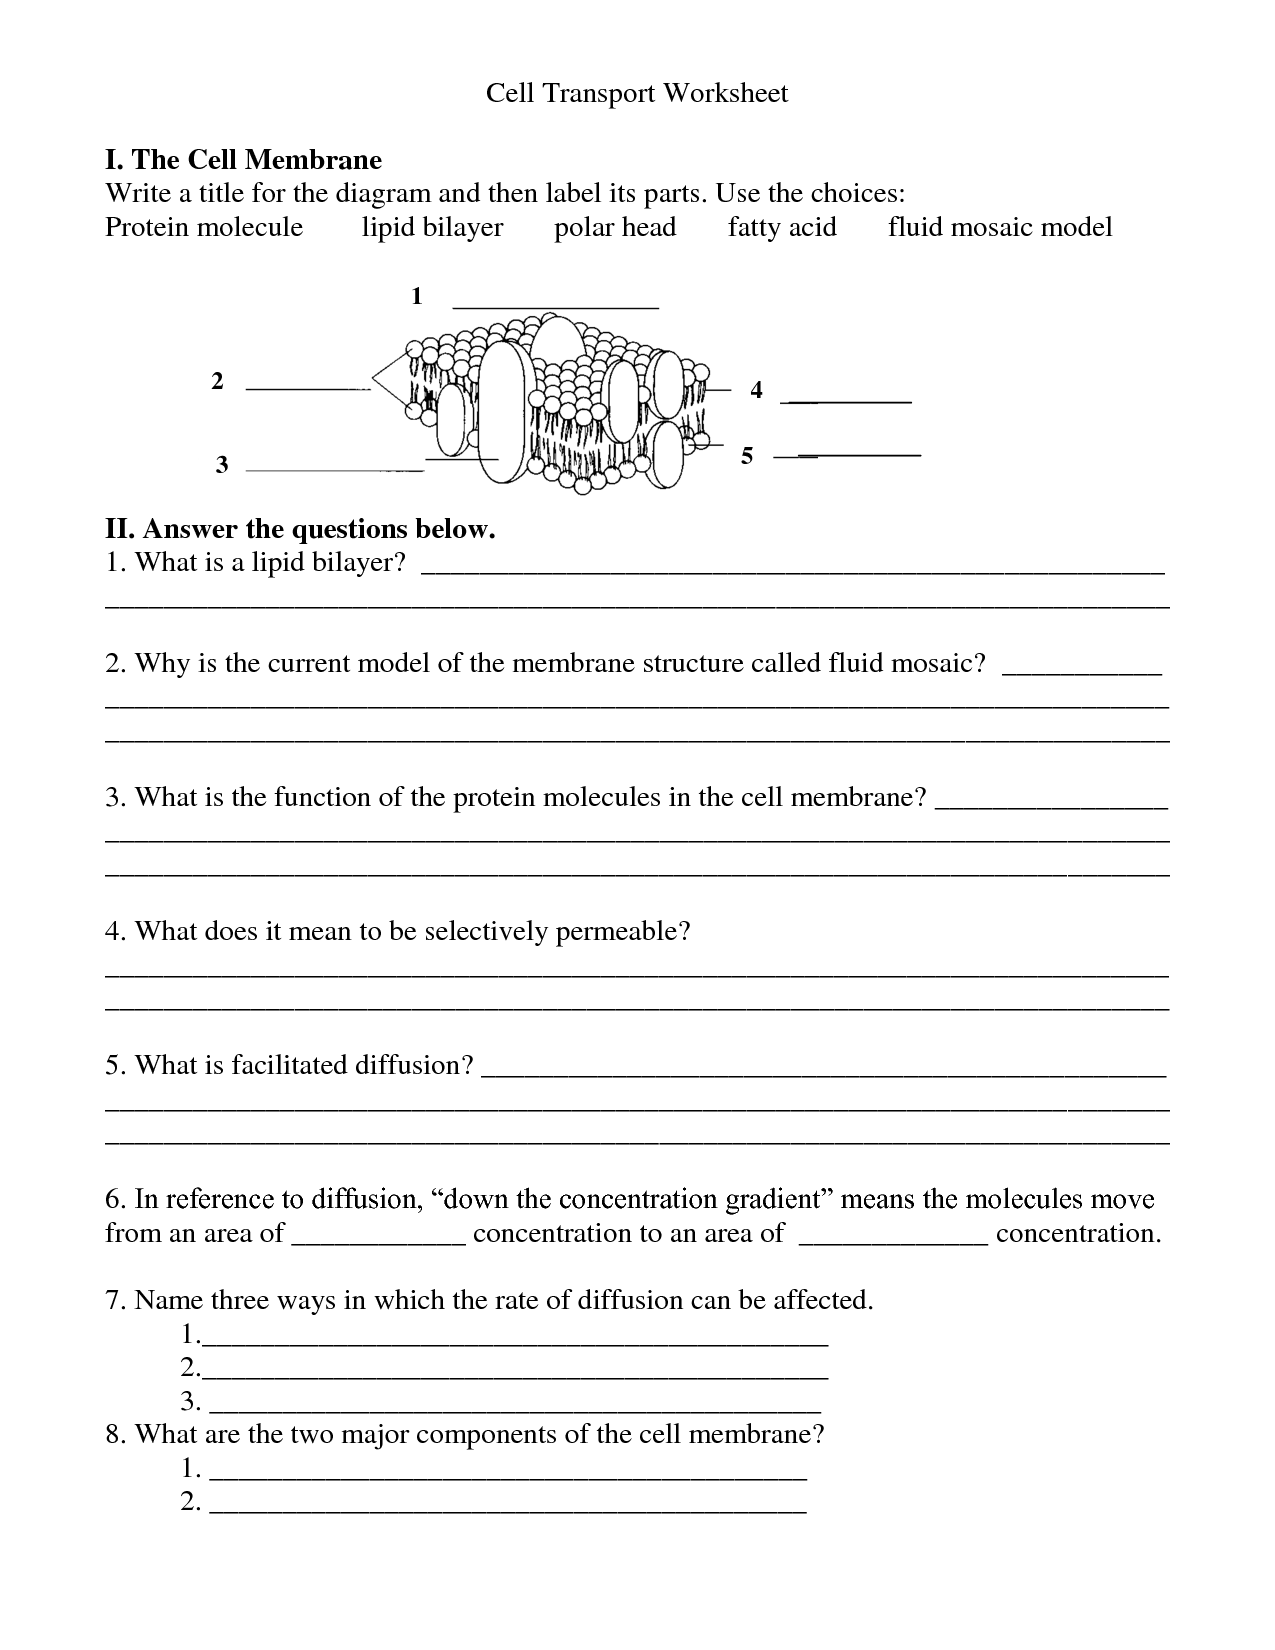 Cell Membrane Coloring Worksheet Answers